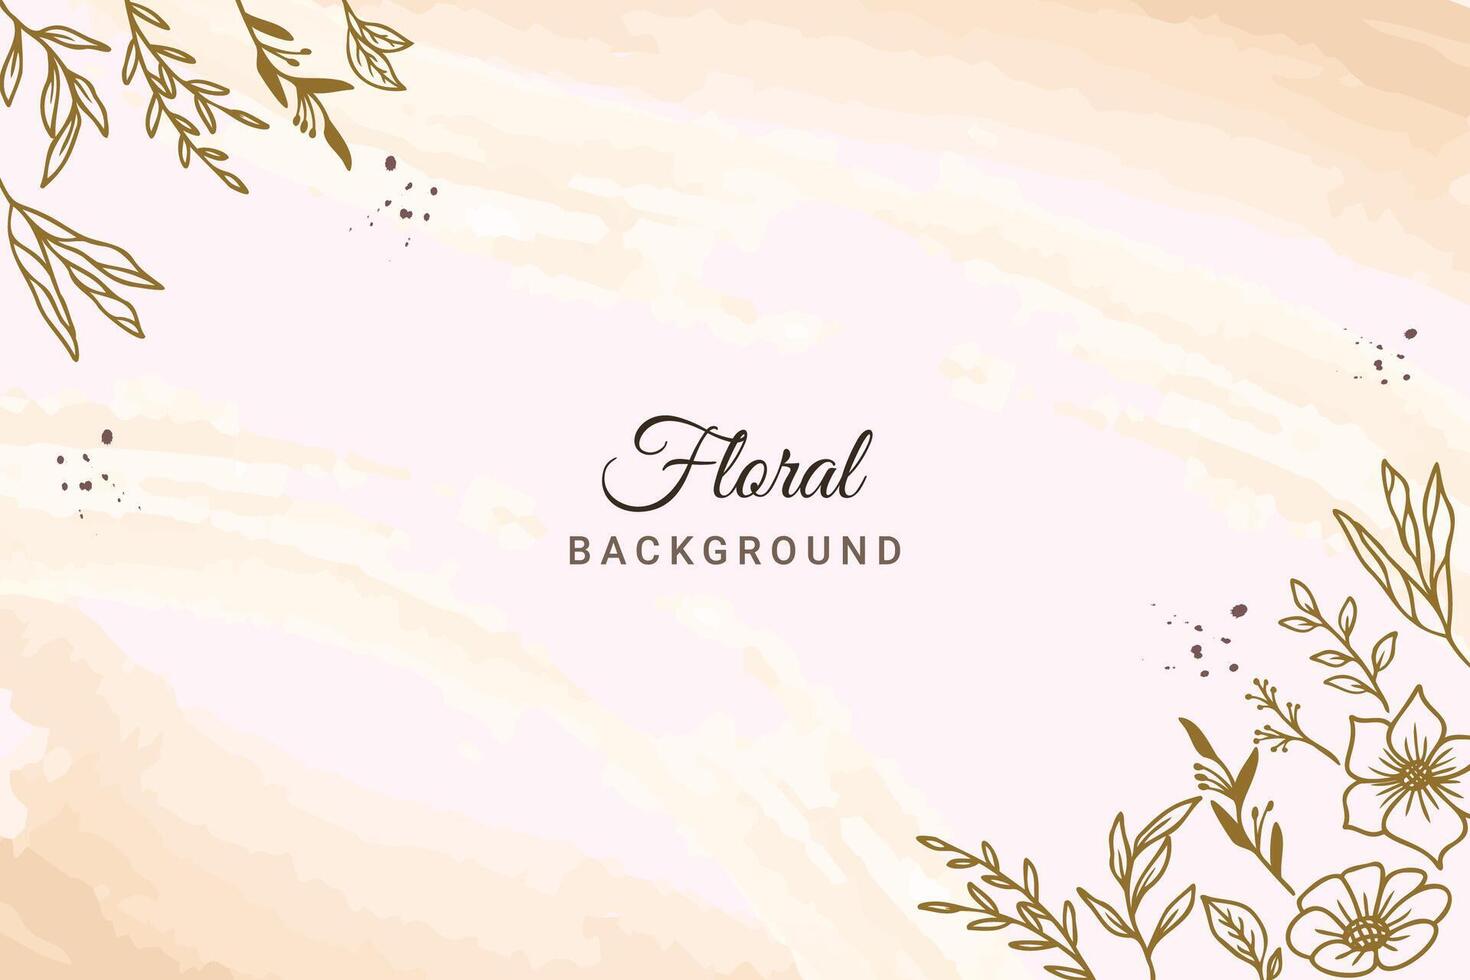 Elegant gold floral background with hand drawn flowers and leaves pattern vector